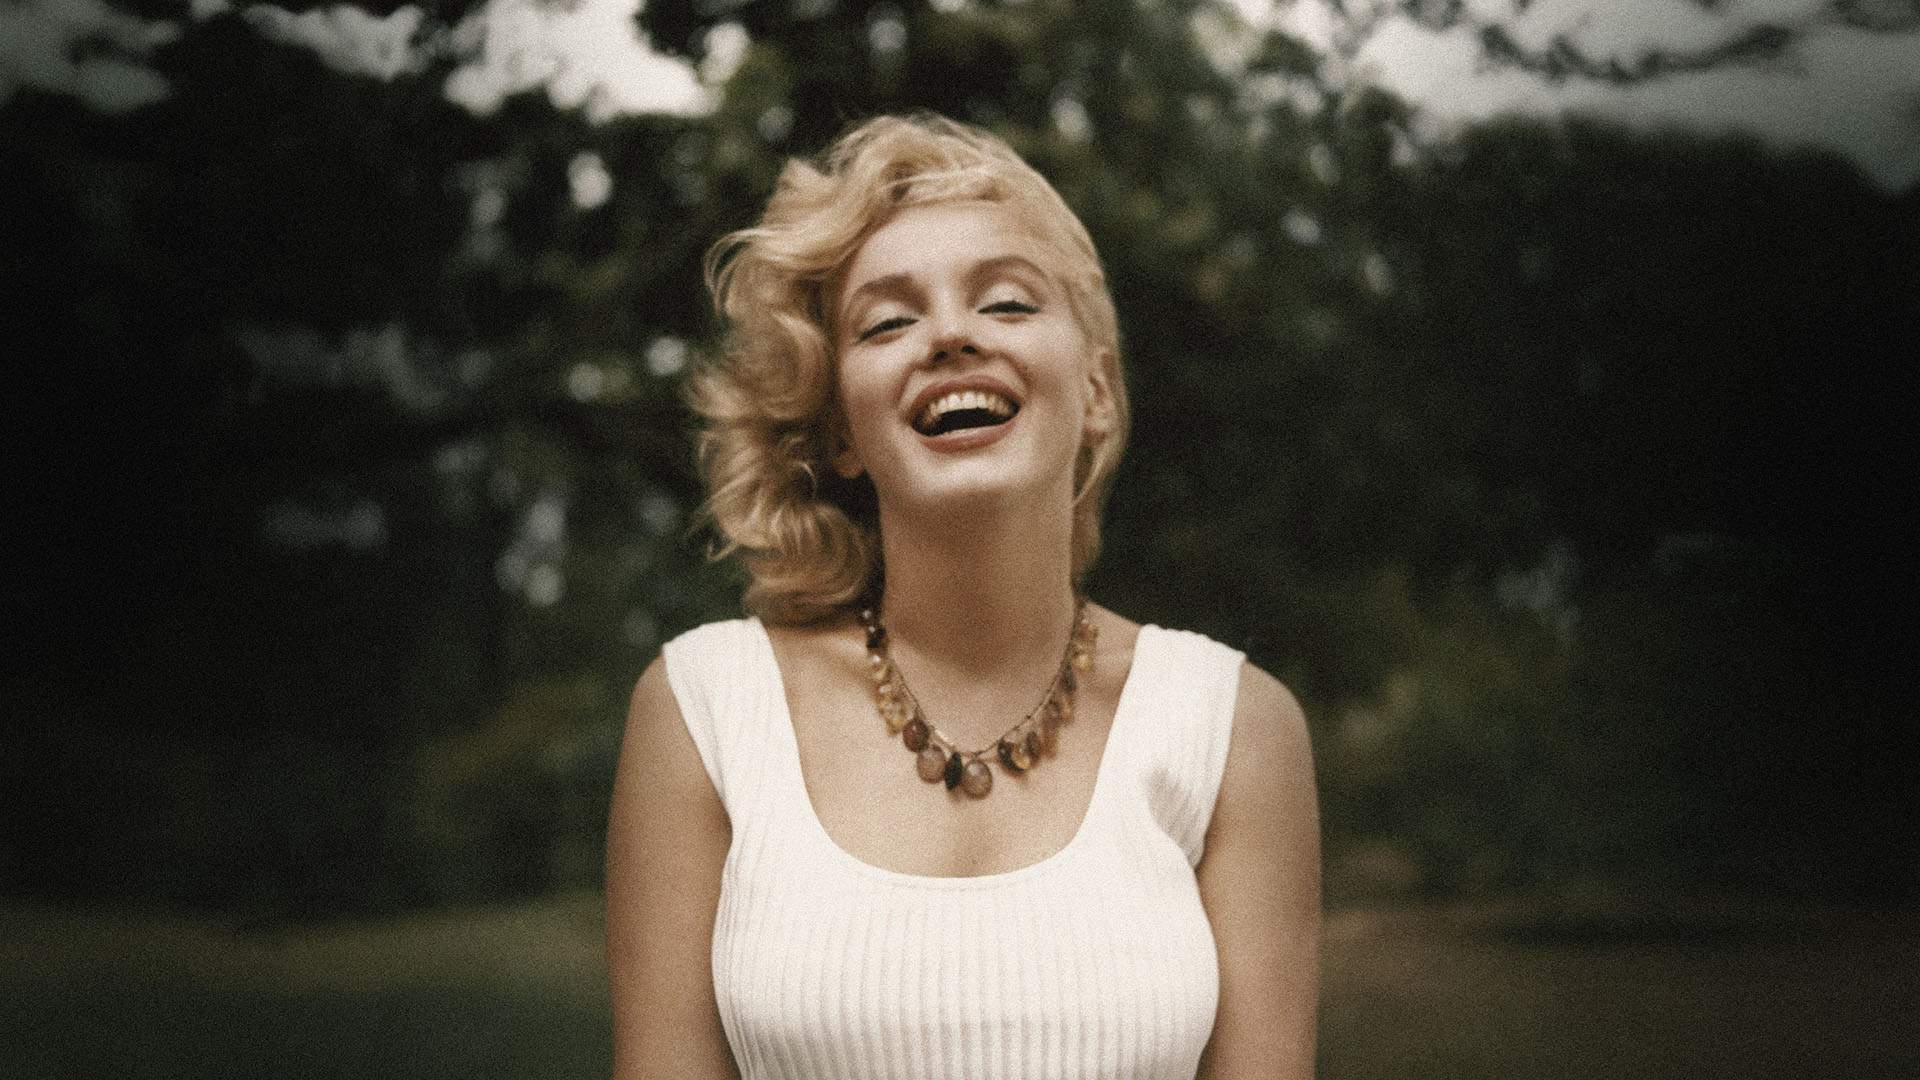 A Massive Marilyn Monroe Exhibition Featuring More Than 200 Artefacts Is Coming to Australia